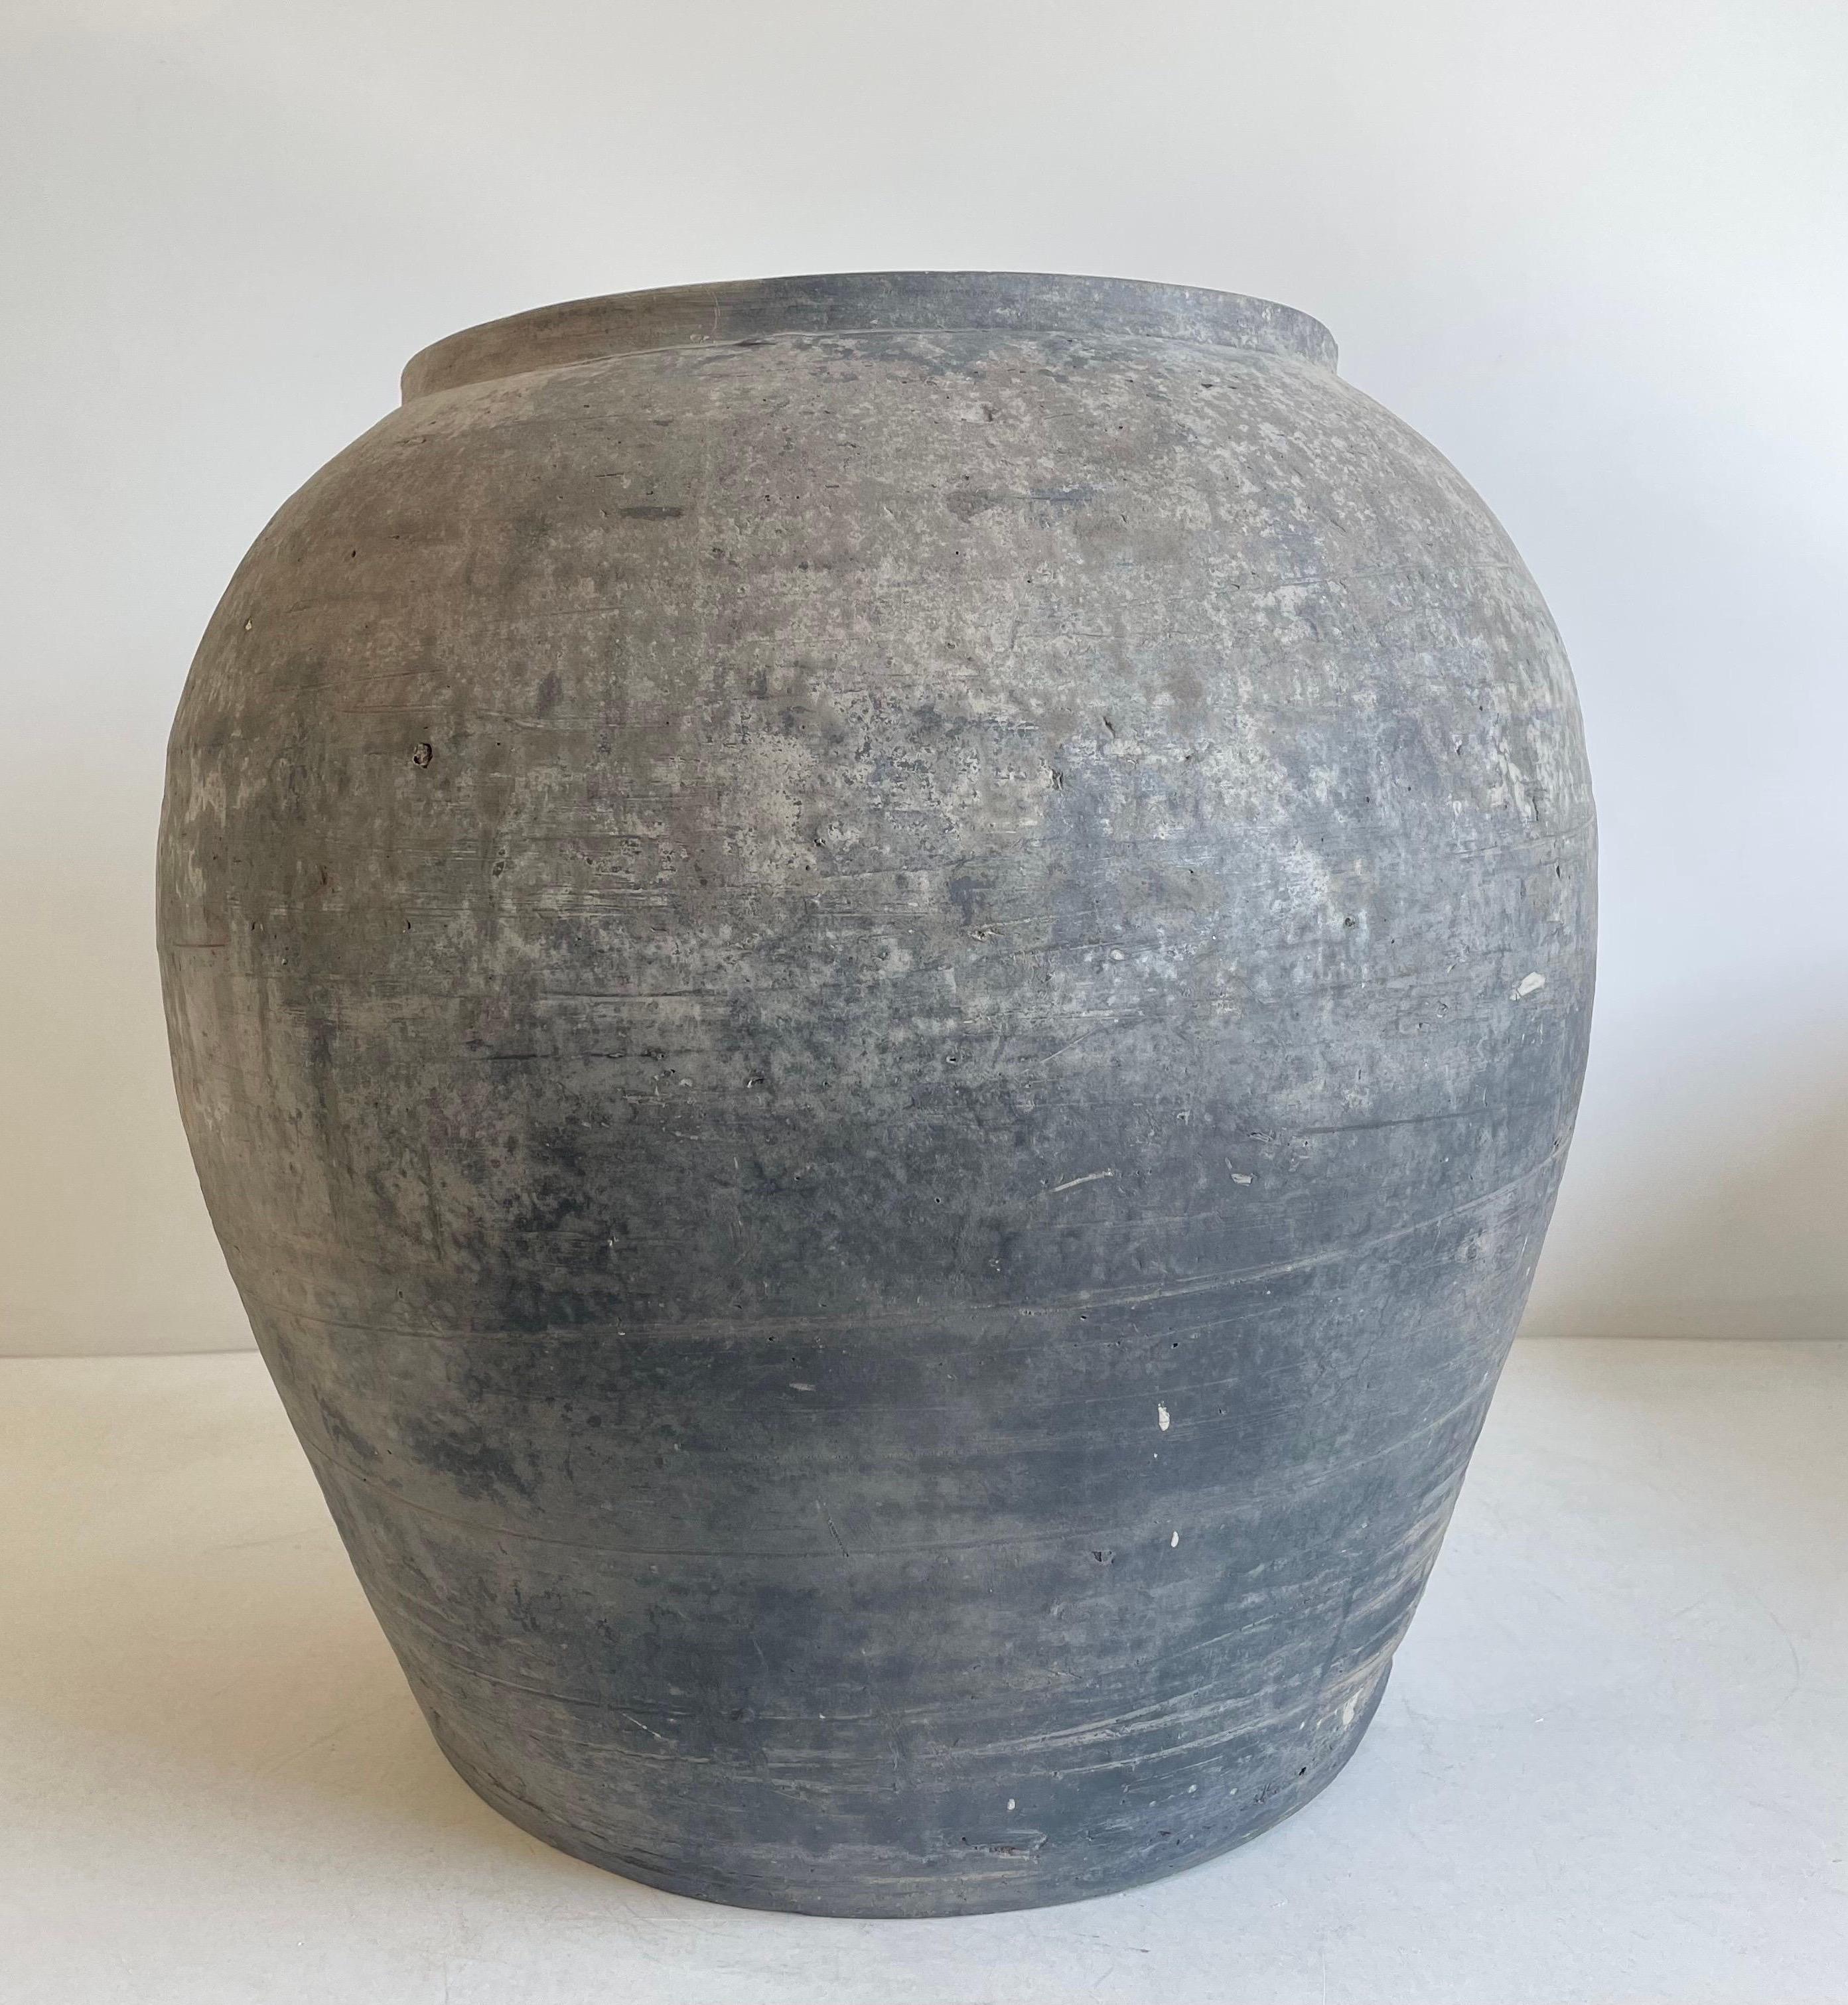 Vintage Matte oil pots pottery rich in character, this vintage oil pot adds just the right amount of texture + warmth where you need it. Stunning matte finish with warm terra-cotta accents, and dark grey tones. Each piece is uniquely special with